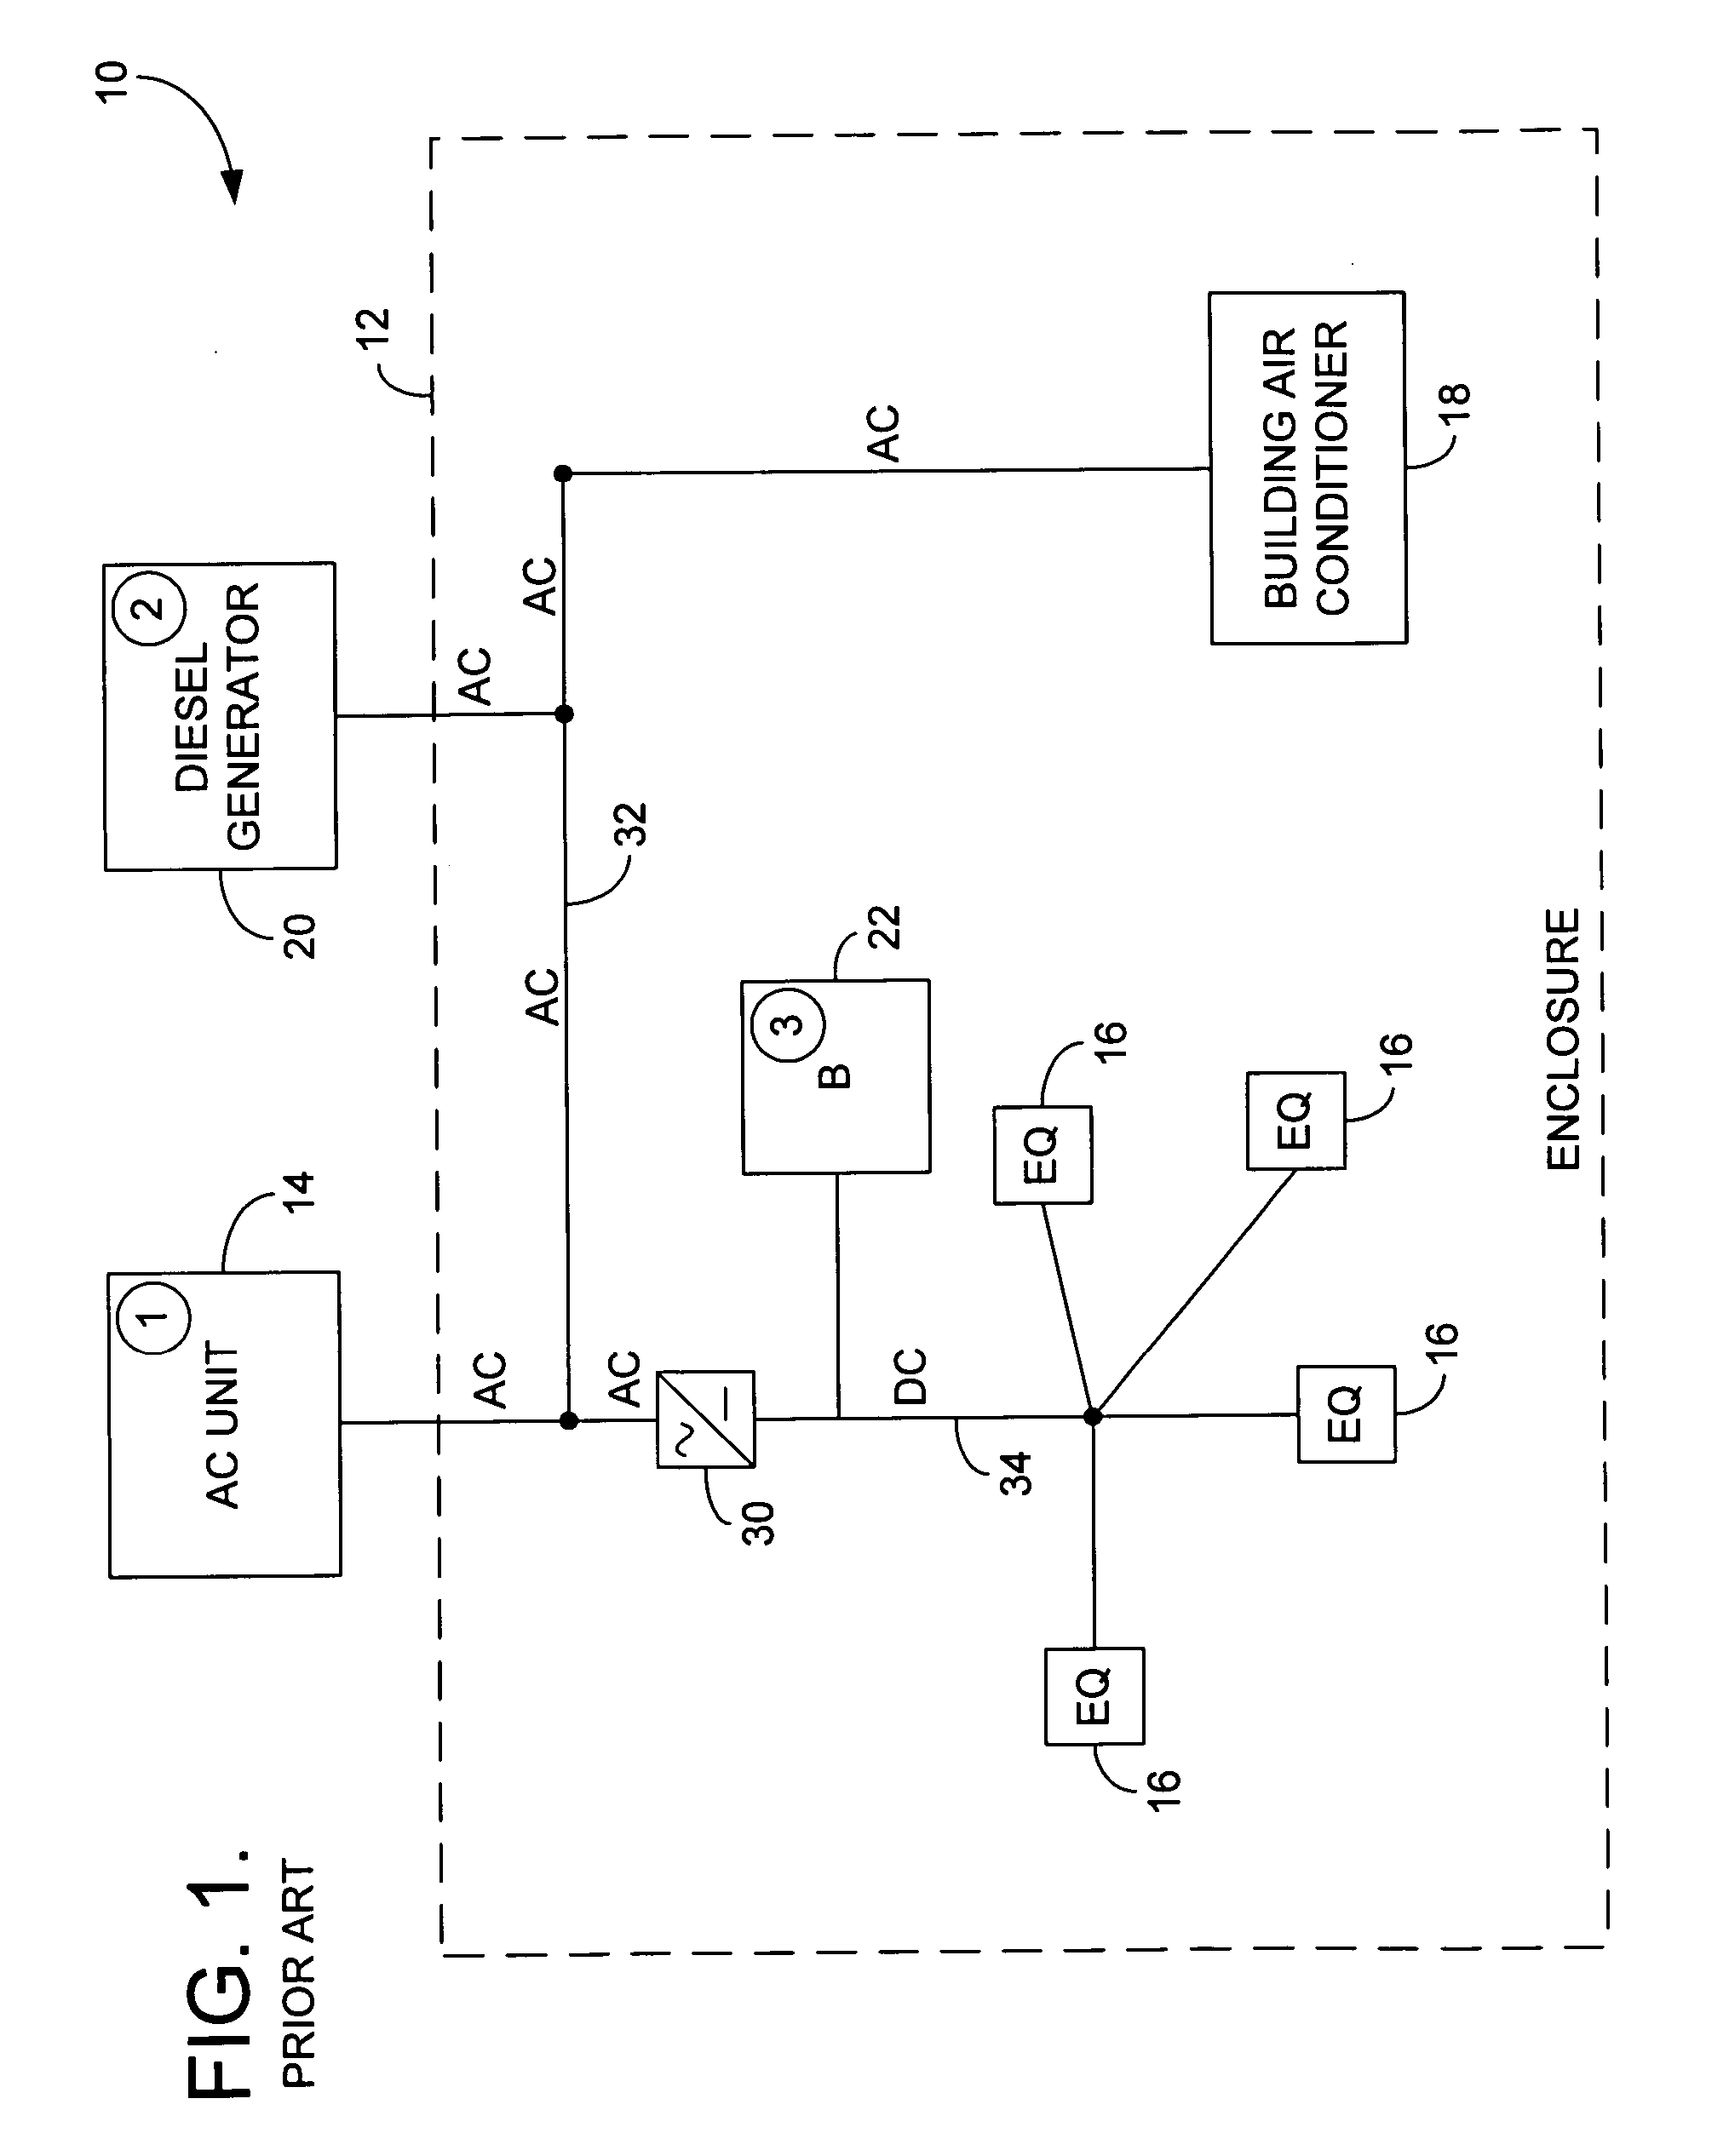 Power system with fuel cell and localized air-conditioning for computing equipment